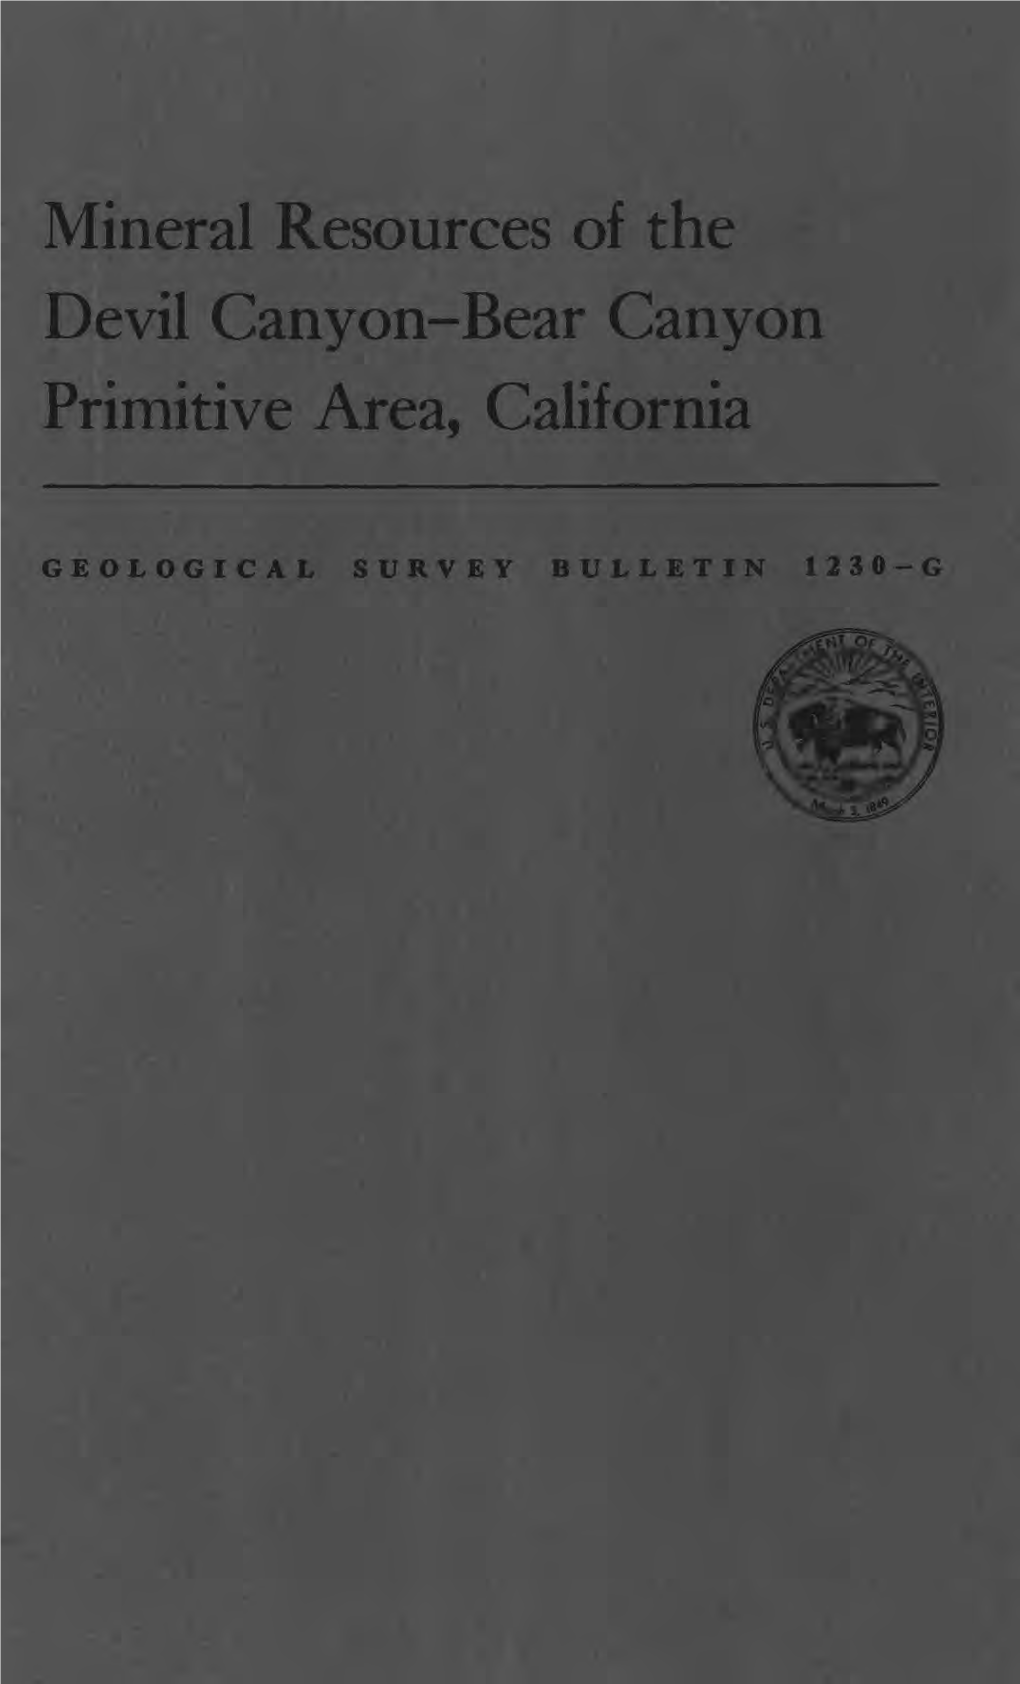 Mineral Resources of the Devil Canyon-Bear Canyon Primitive Area, California